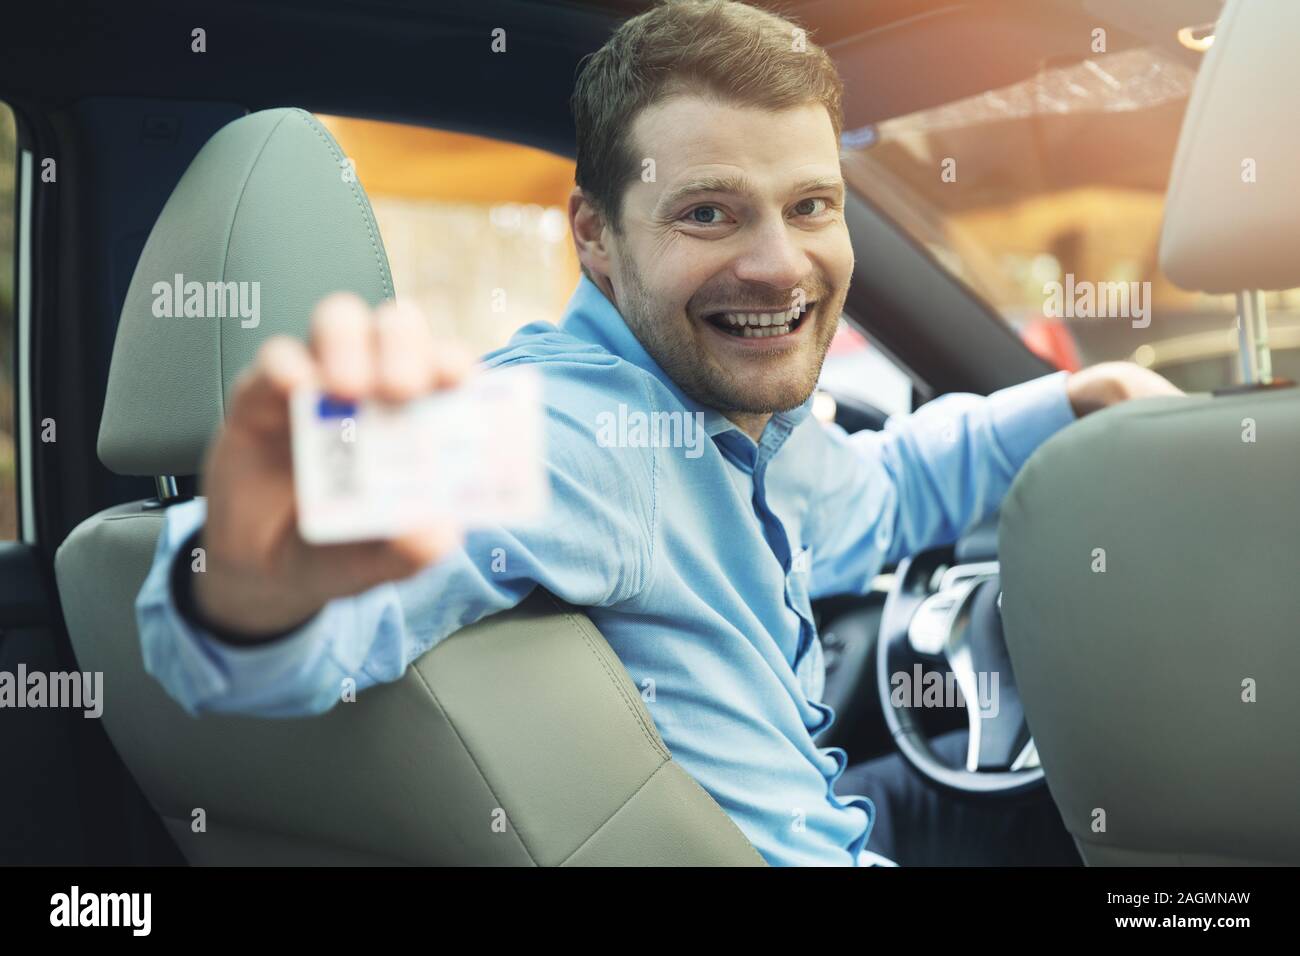 driving school - man sitting inside the car and showing his driver license Stock Photo